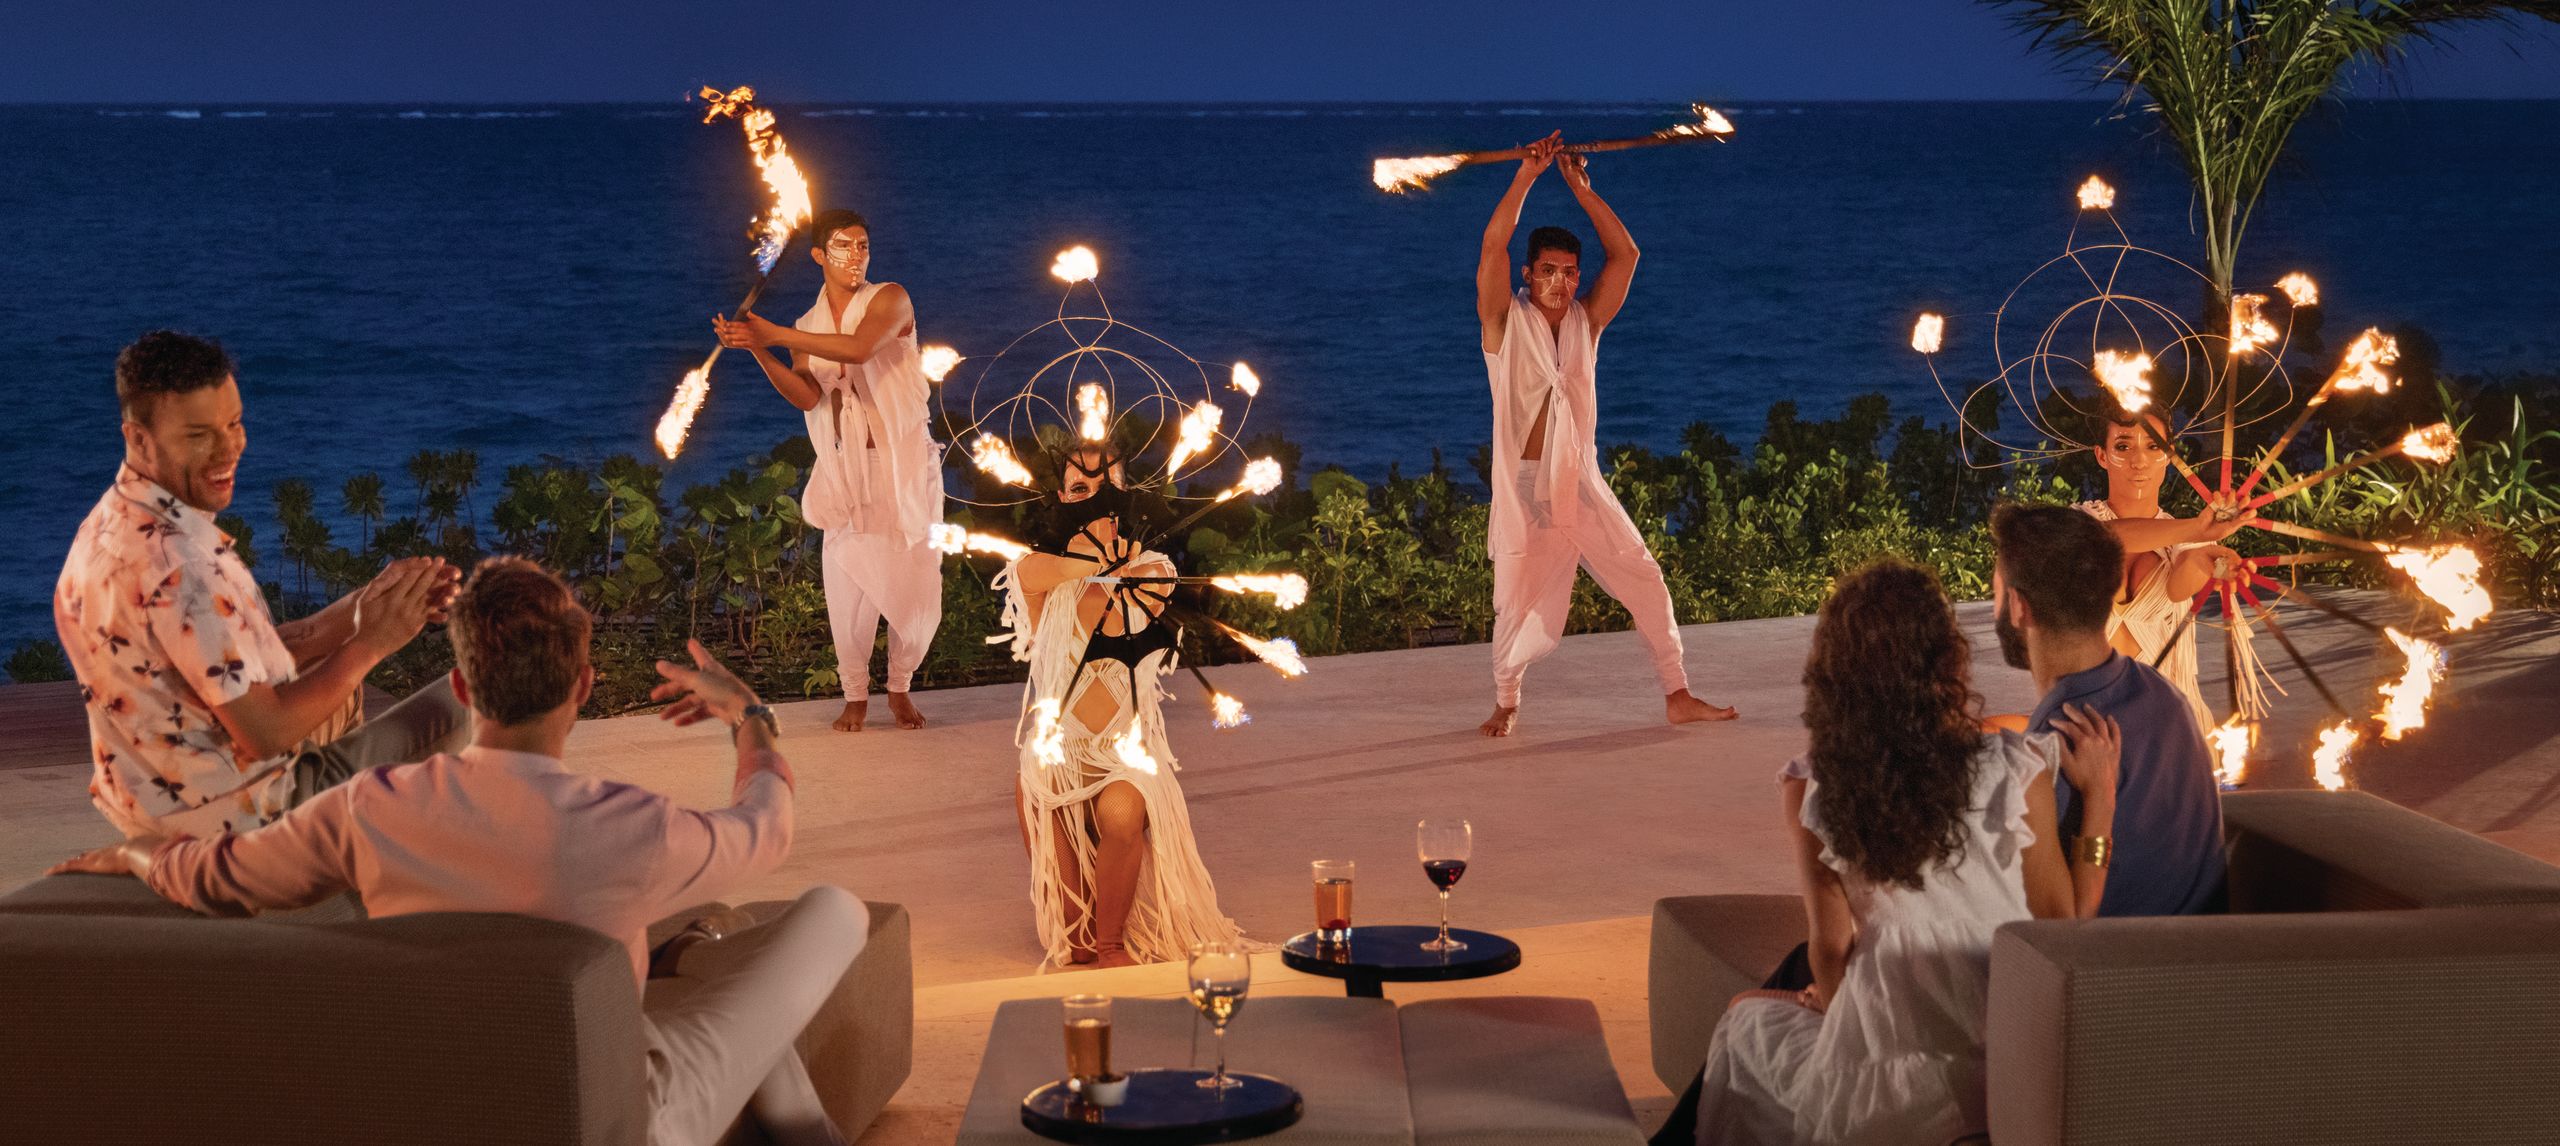 Guests watch and cheer for fire dancers in front of the ocean